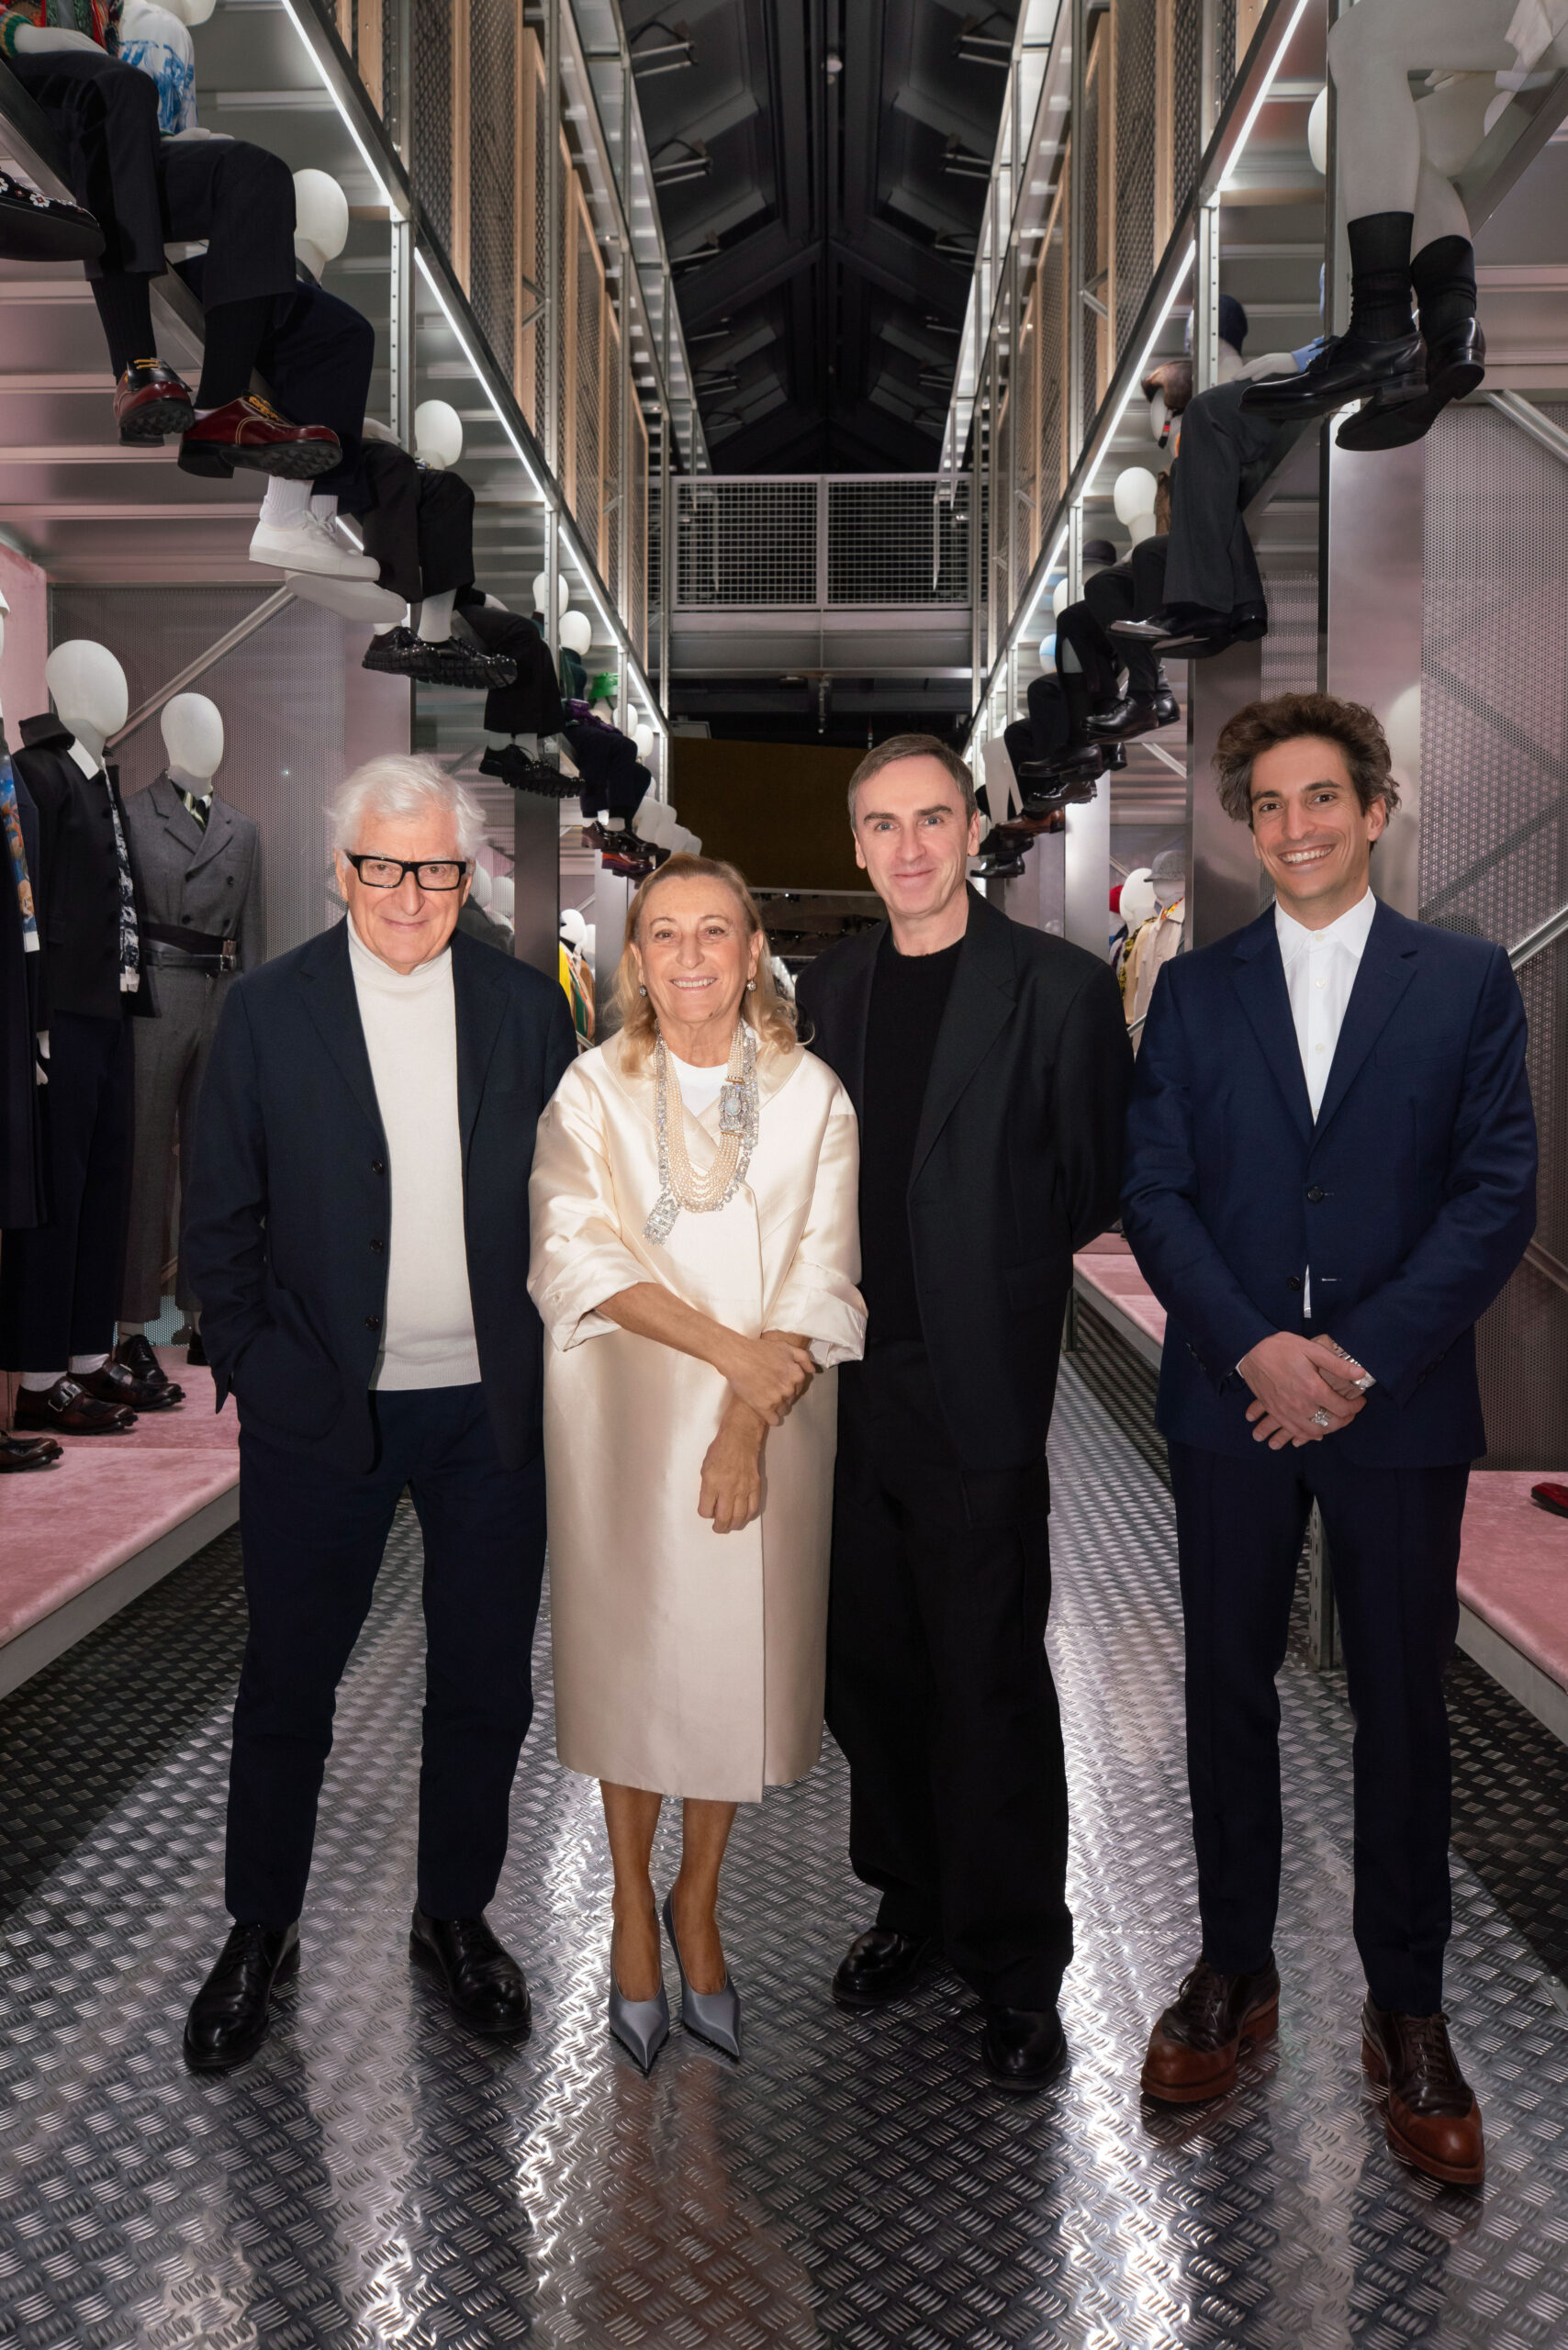 Core Figures of the Prada Family Gathering in Shanghai